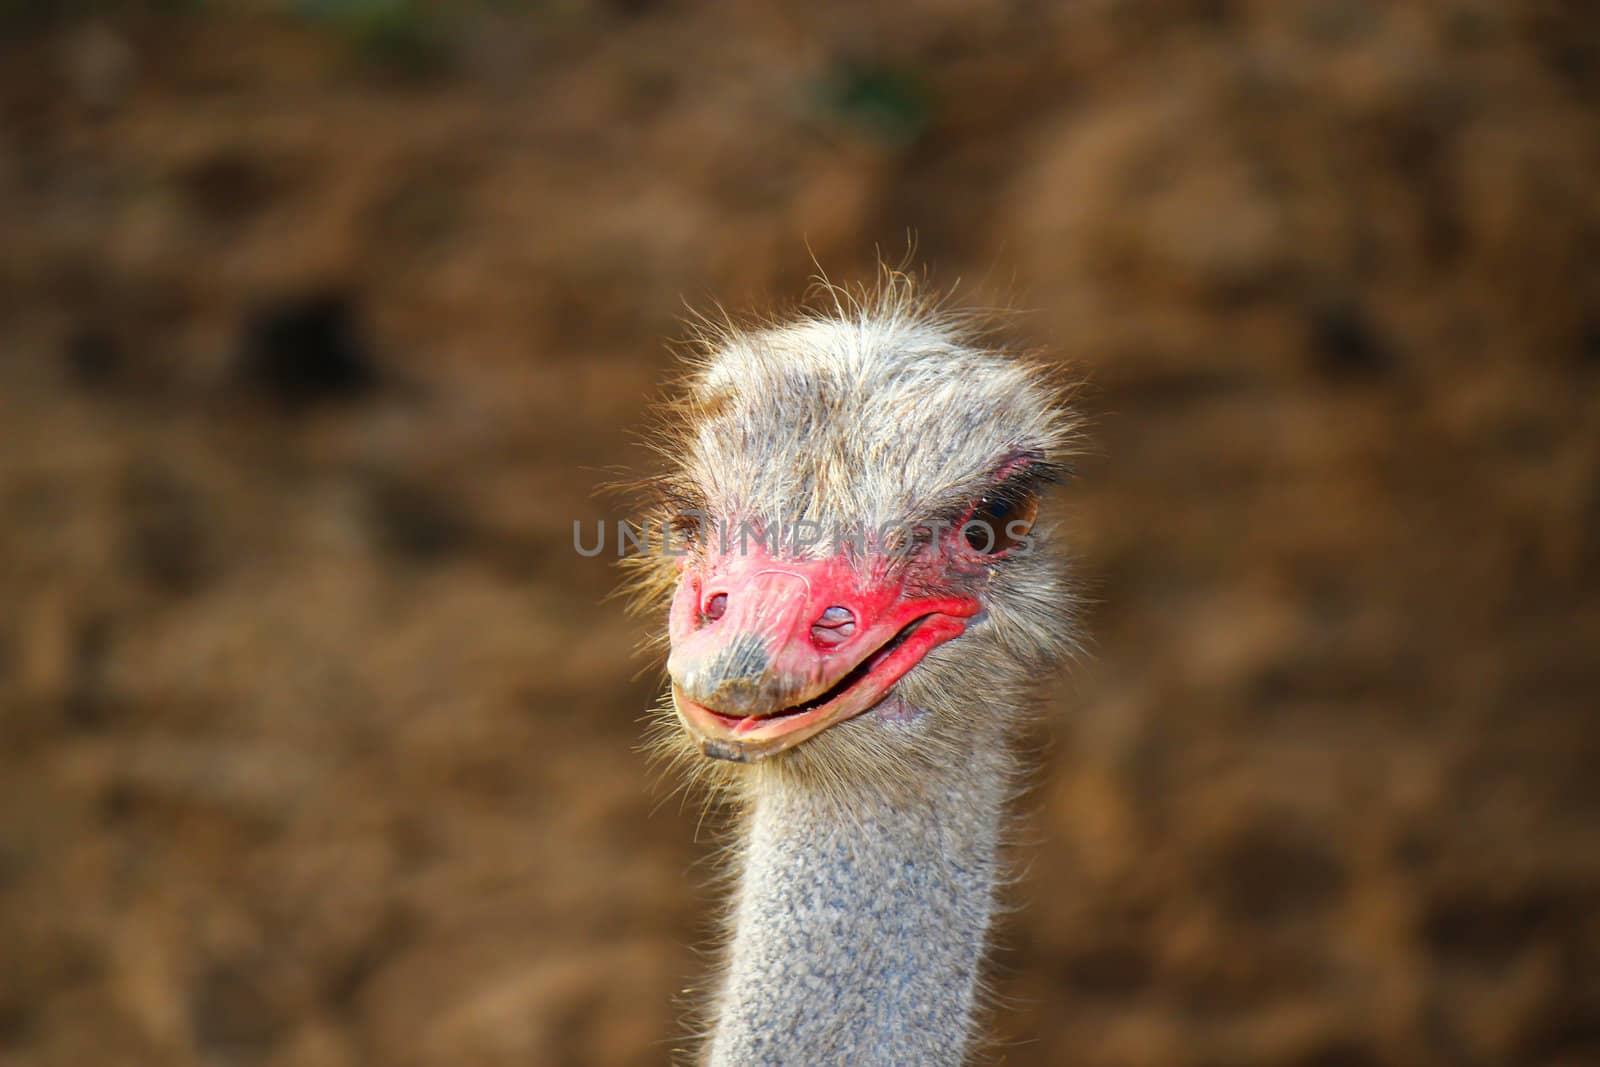 Close up on a ostrich's head